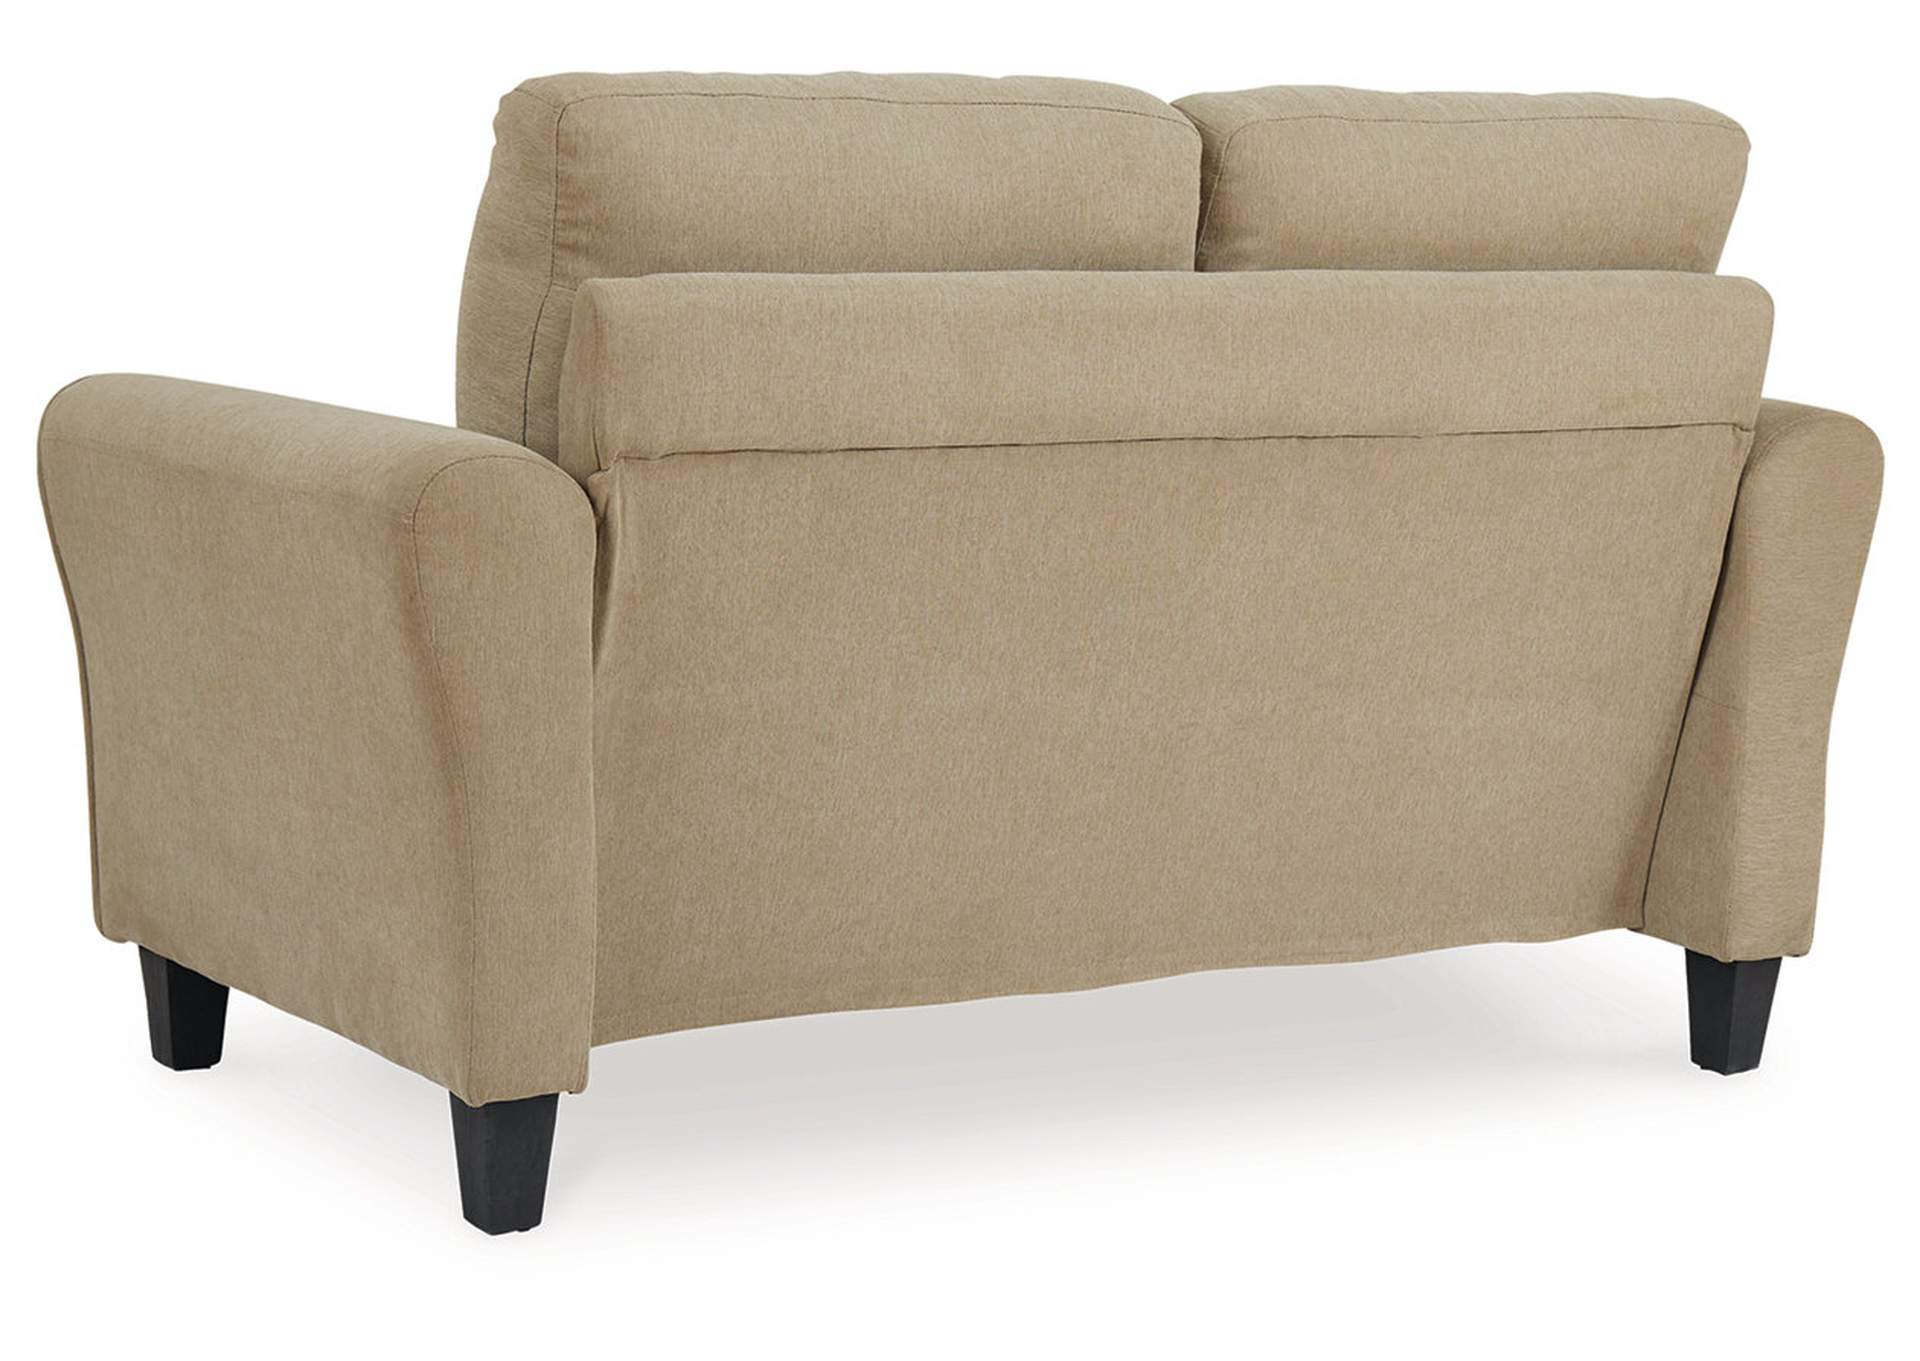 Carten Sofa and Loveseat,Signature Design By Ashley